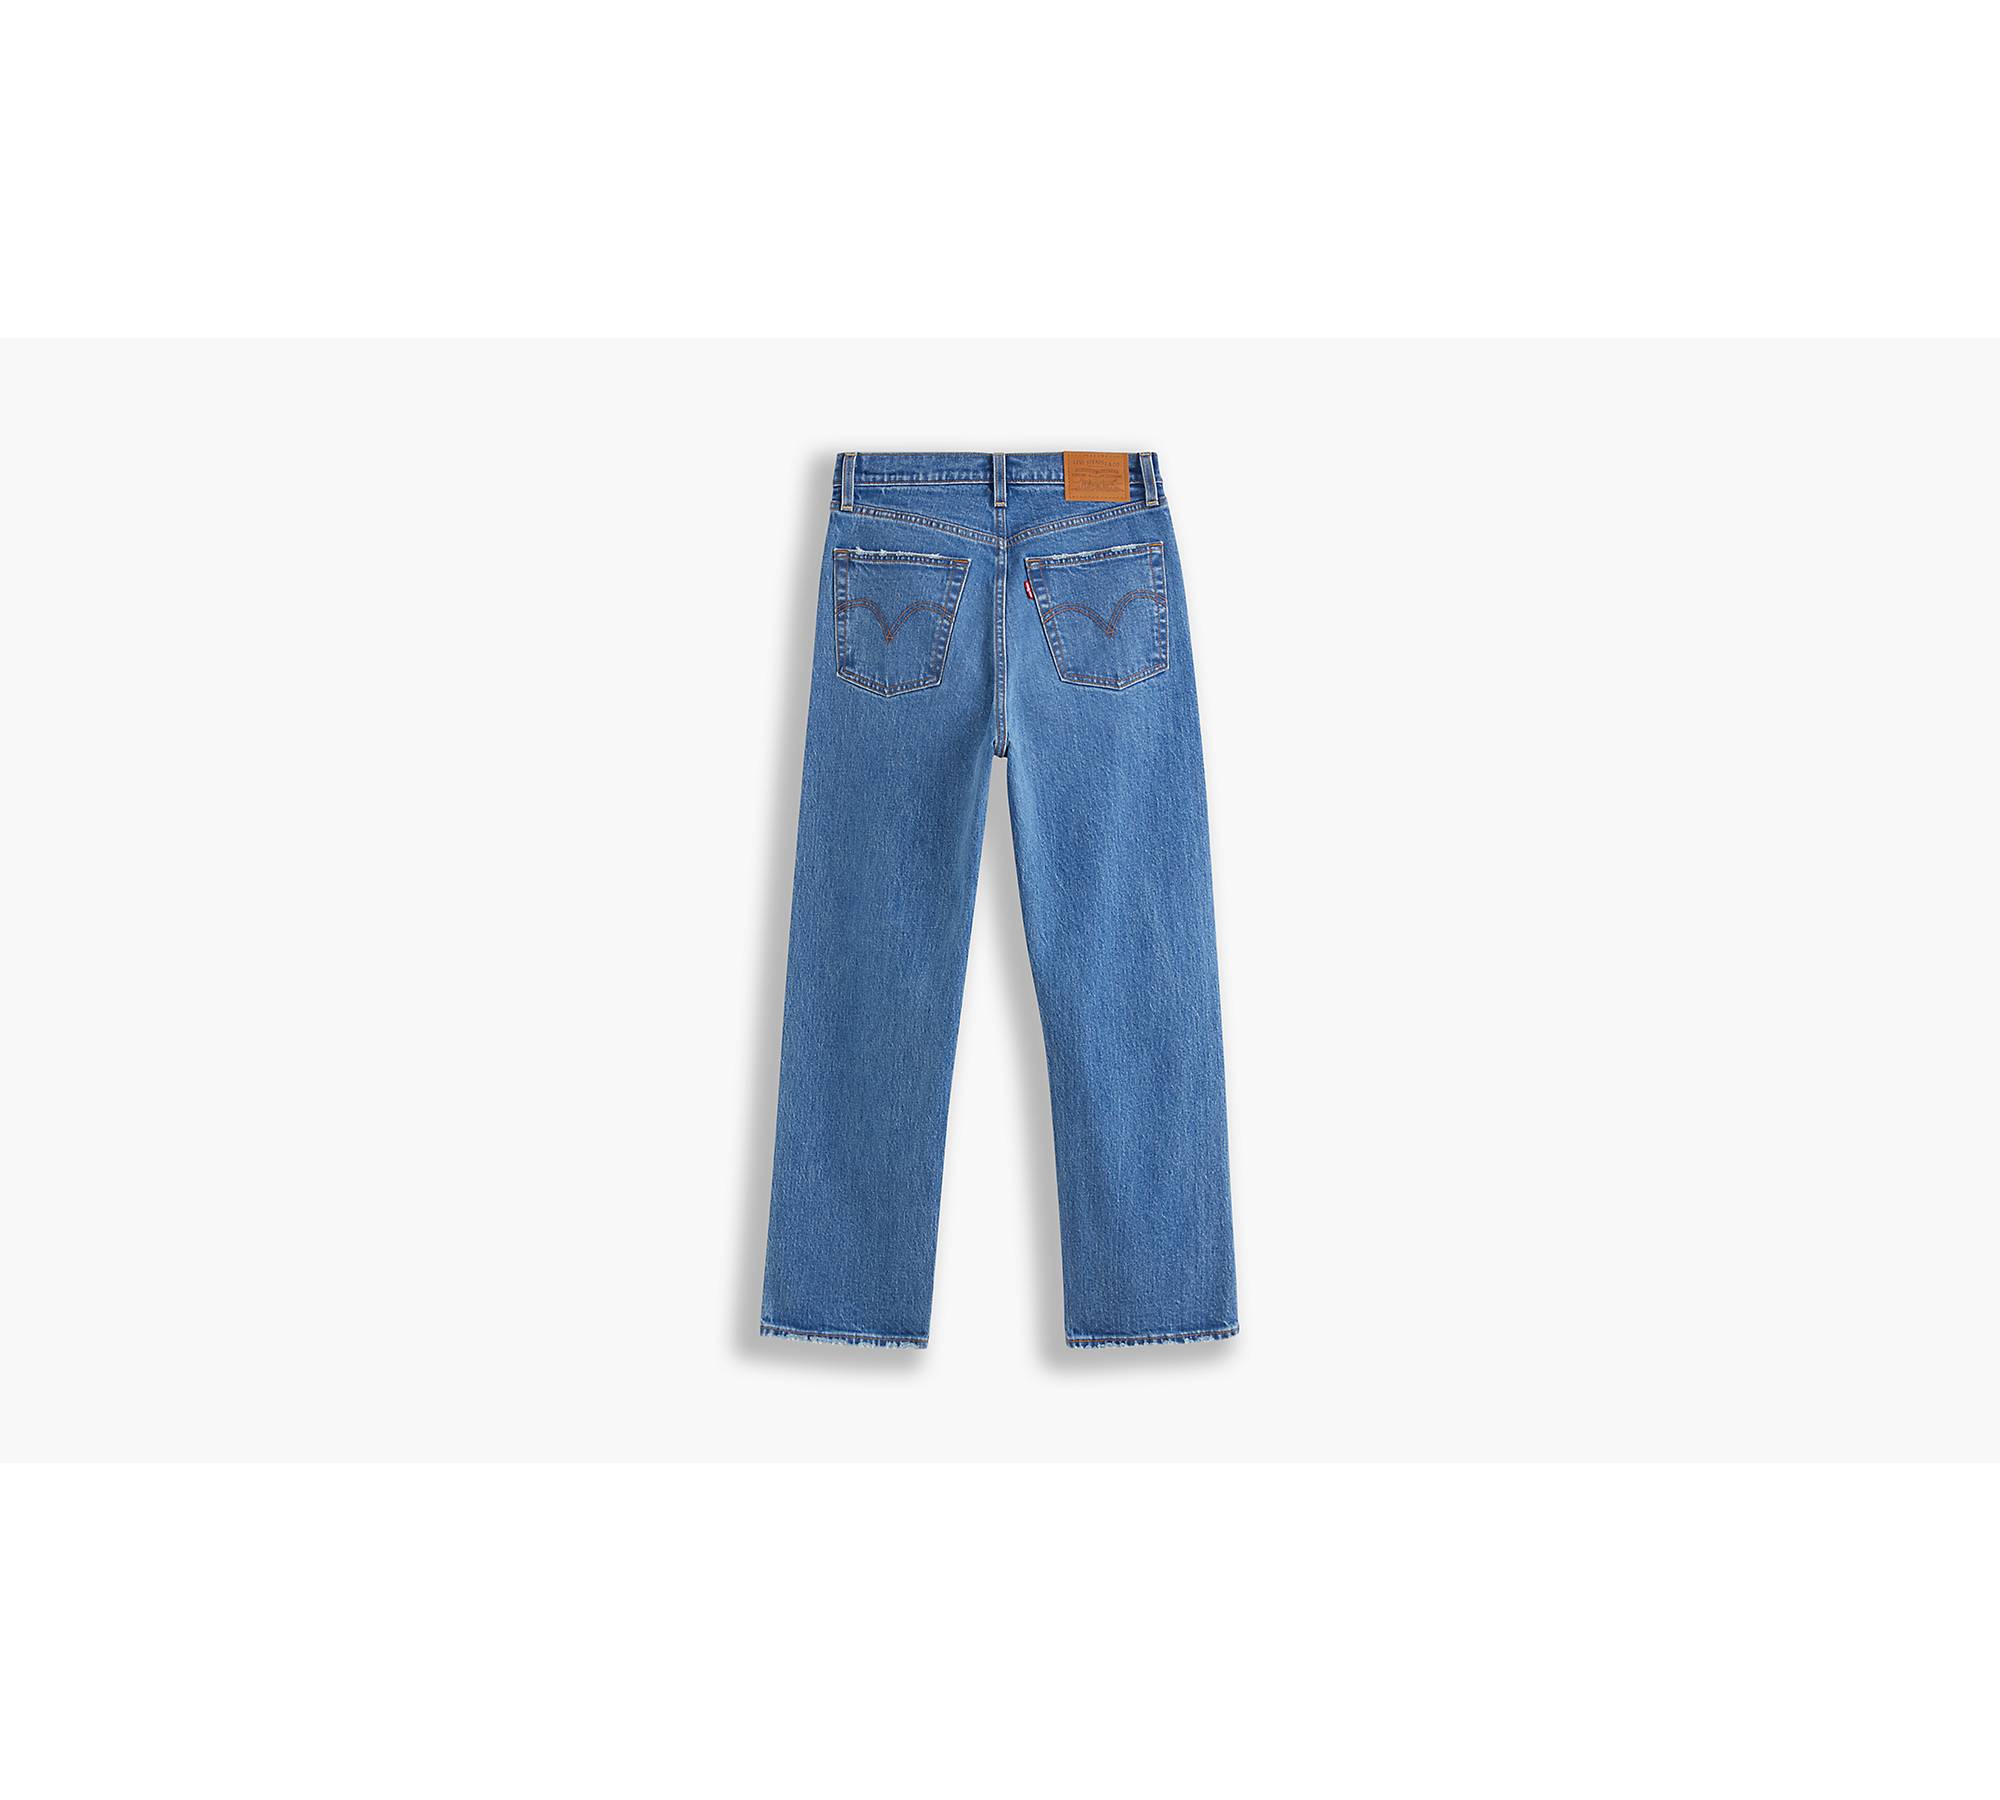 Levi's Ribcage Straight Ankle Jeans In The Middle